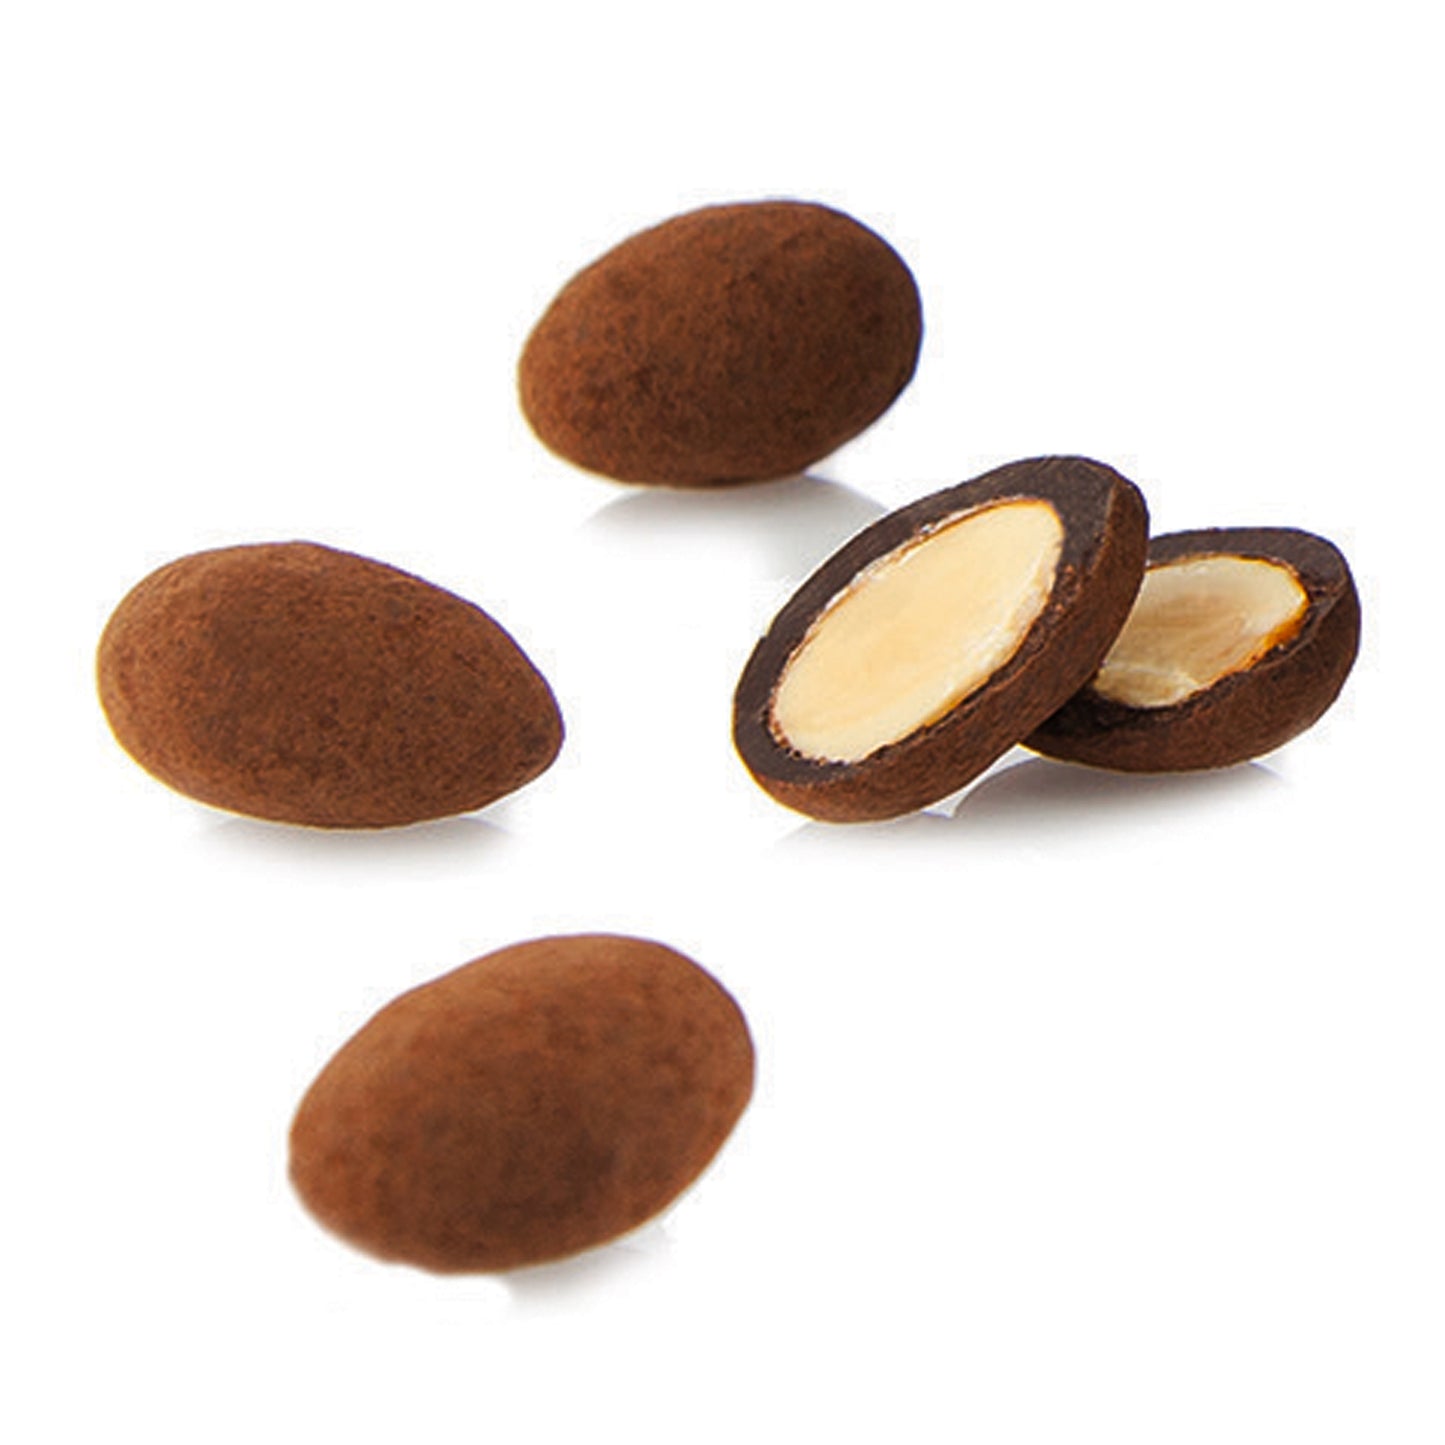 Pugliese Chocolate Covered Caramelized Almonds